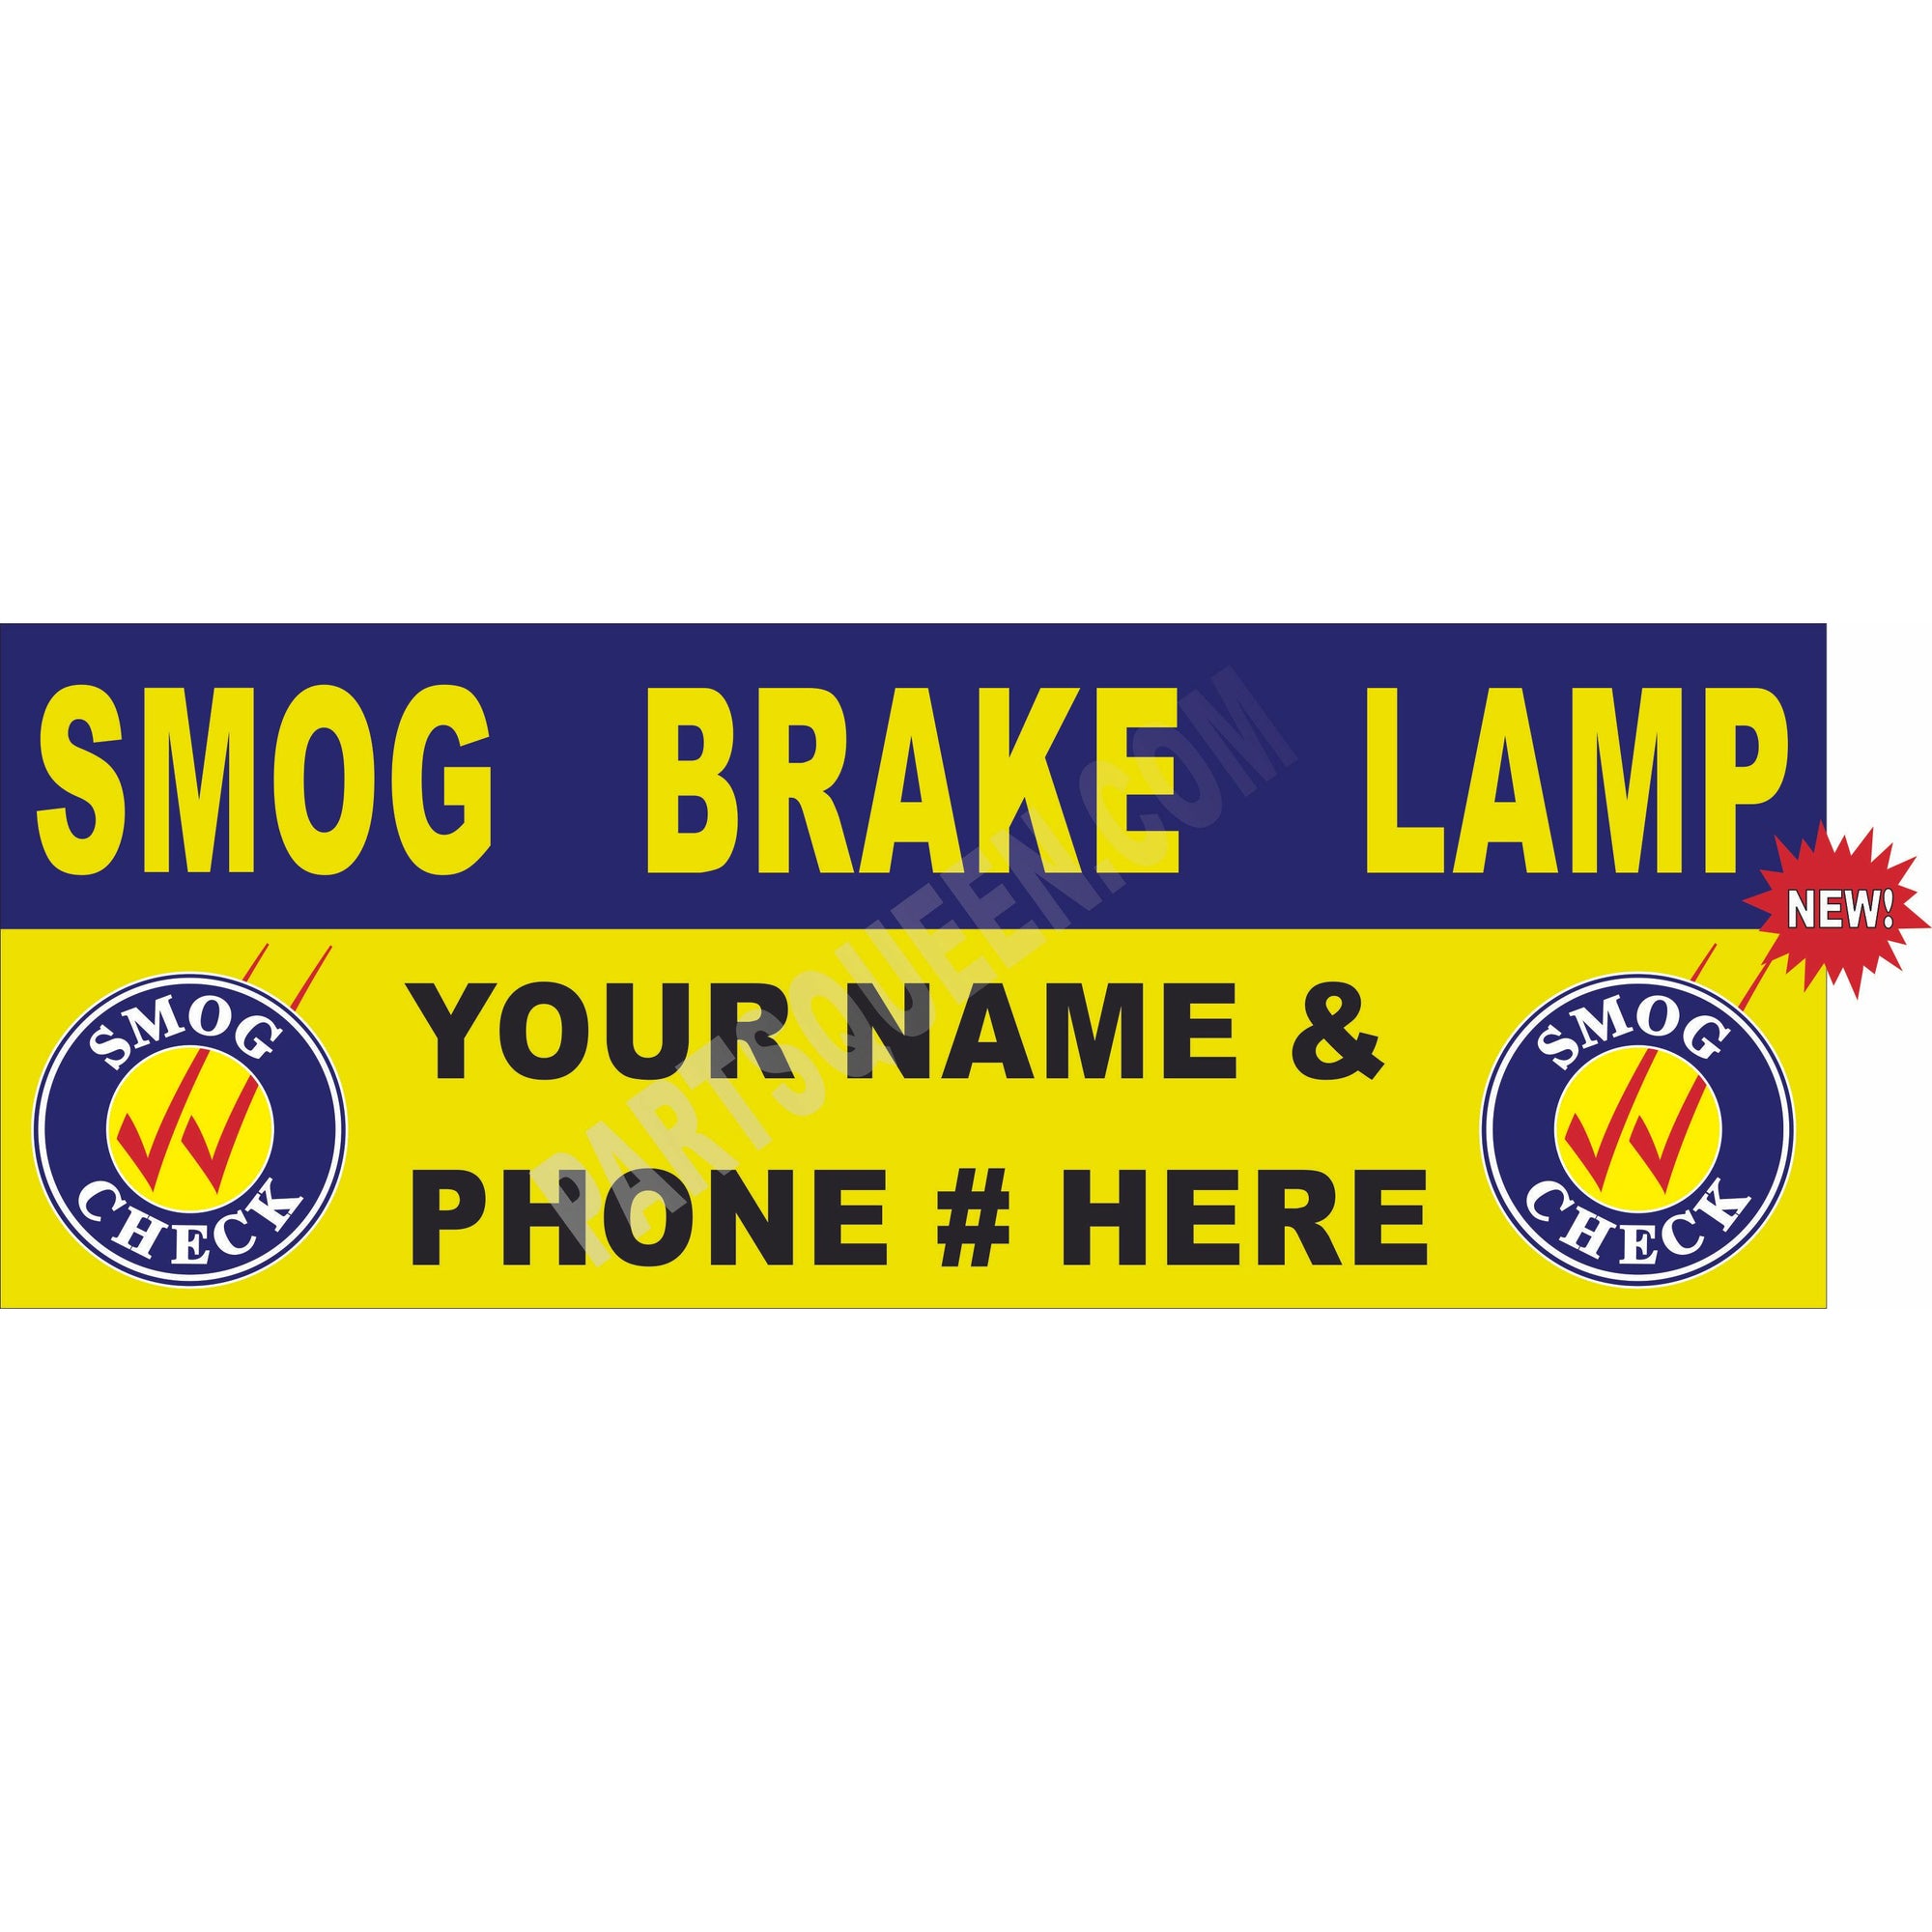 SB-709 SMOG BRAKE LAMP with your BUSINESS NAME & PHONE NUMBER  ...